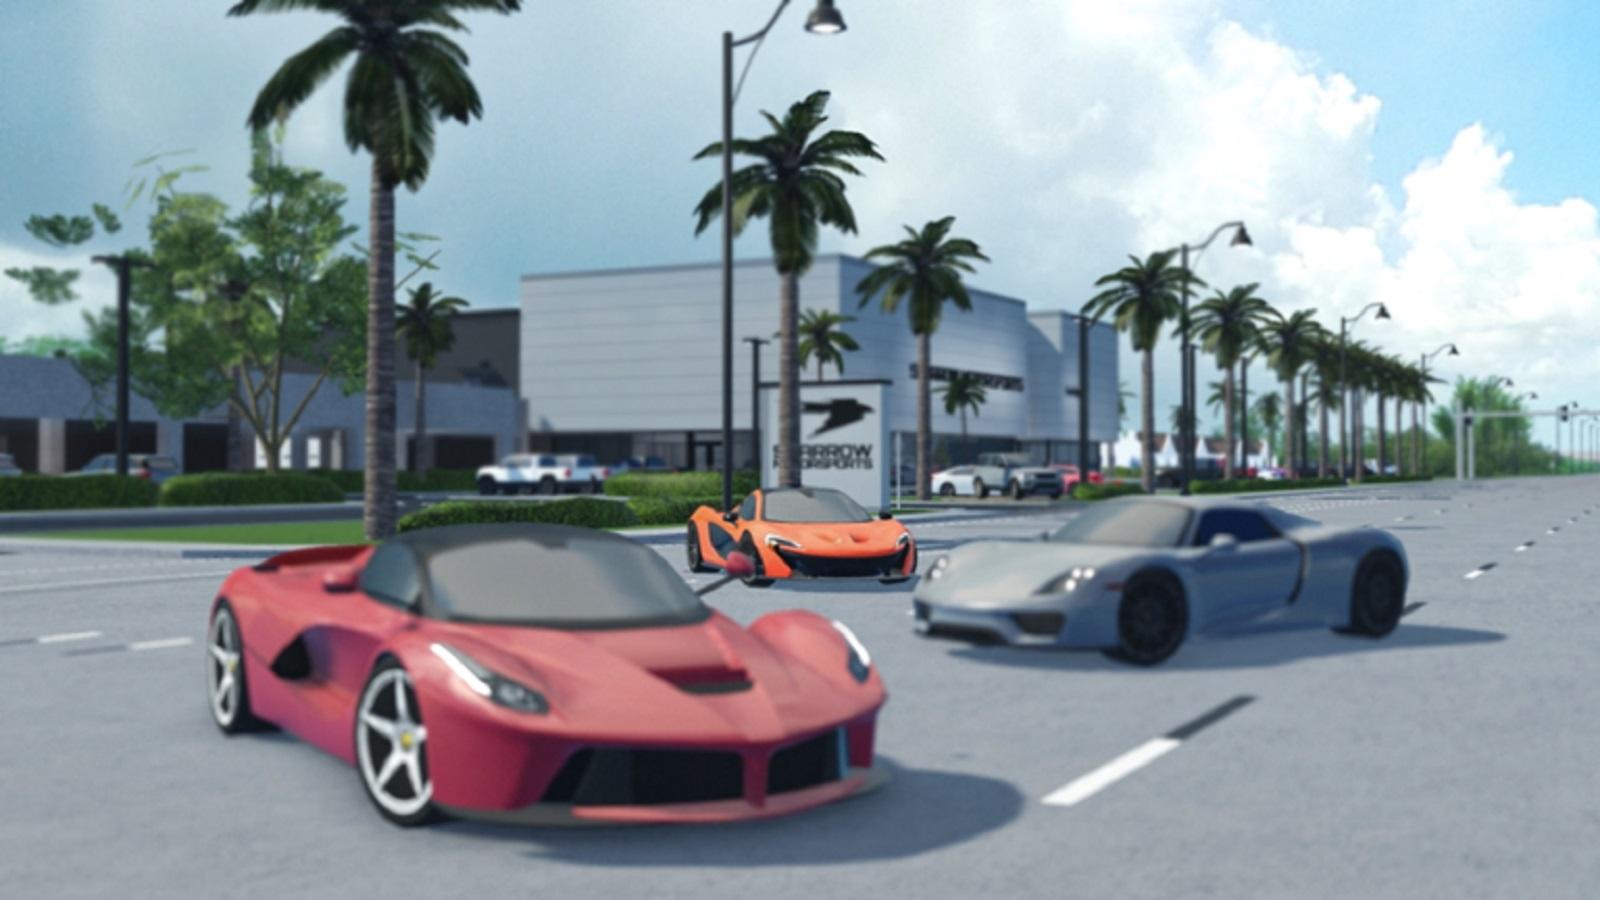 Roblox Southwest Florida codes (May 2023): Free cars, cash & more - Dexerto